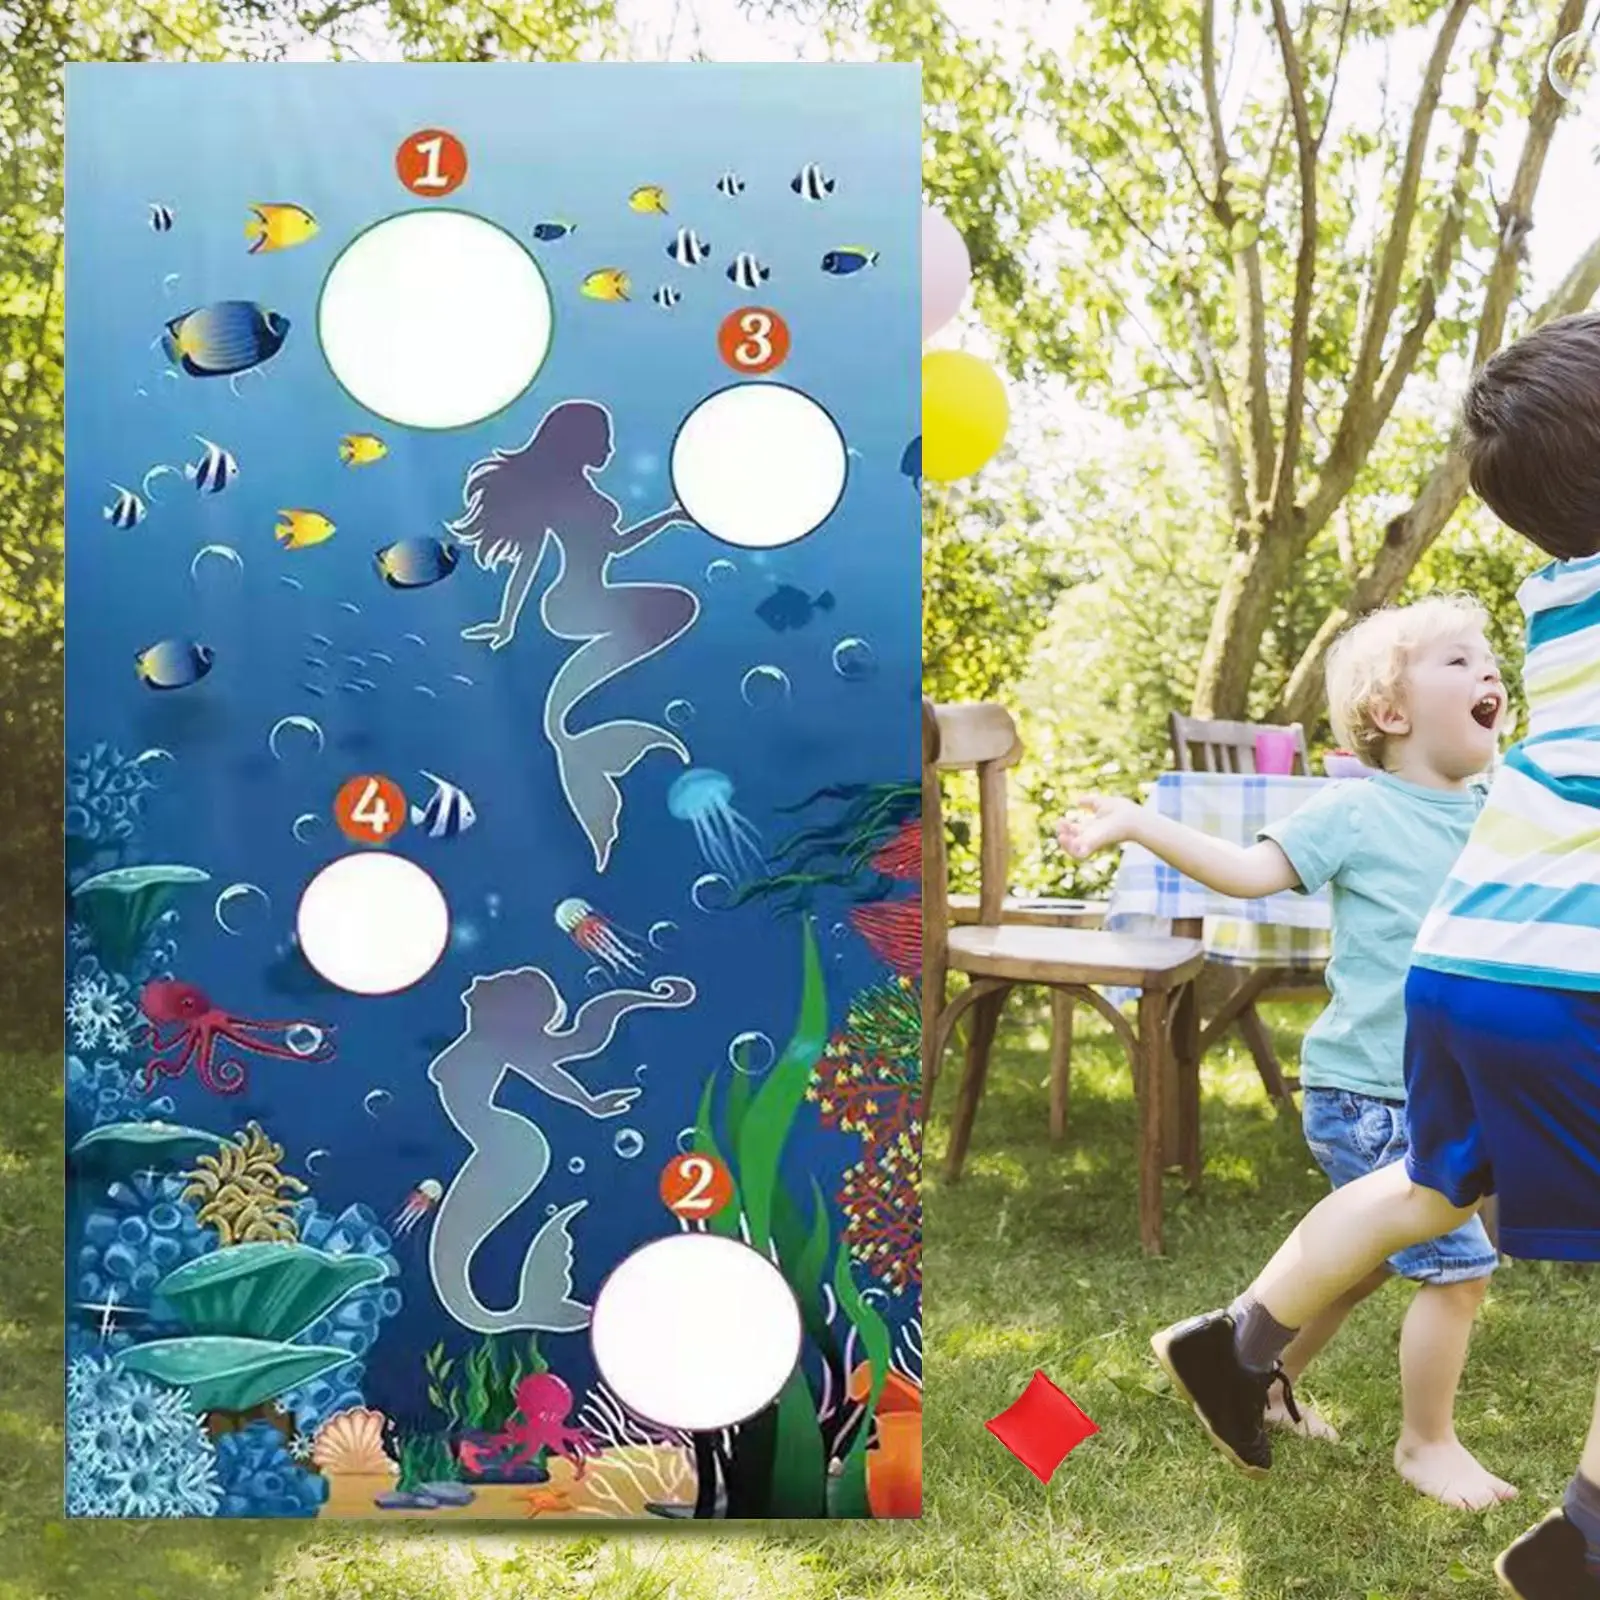 Funny Sandbag Throwing Game 30x53 inch Large Mermaid Theme  Toss Games Sacks Games Toys for Kids Party Toy Toss Game Family